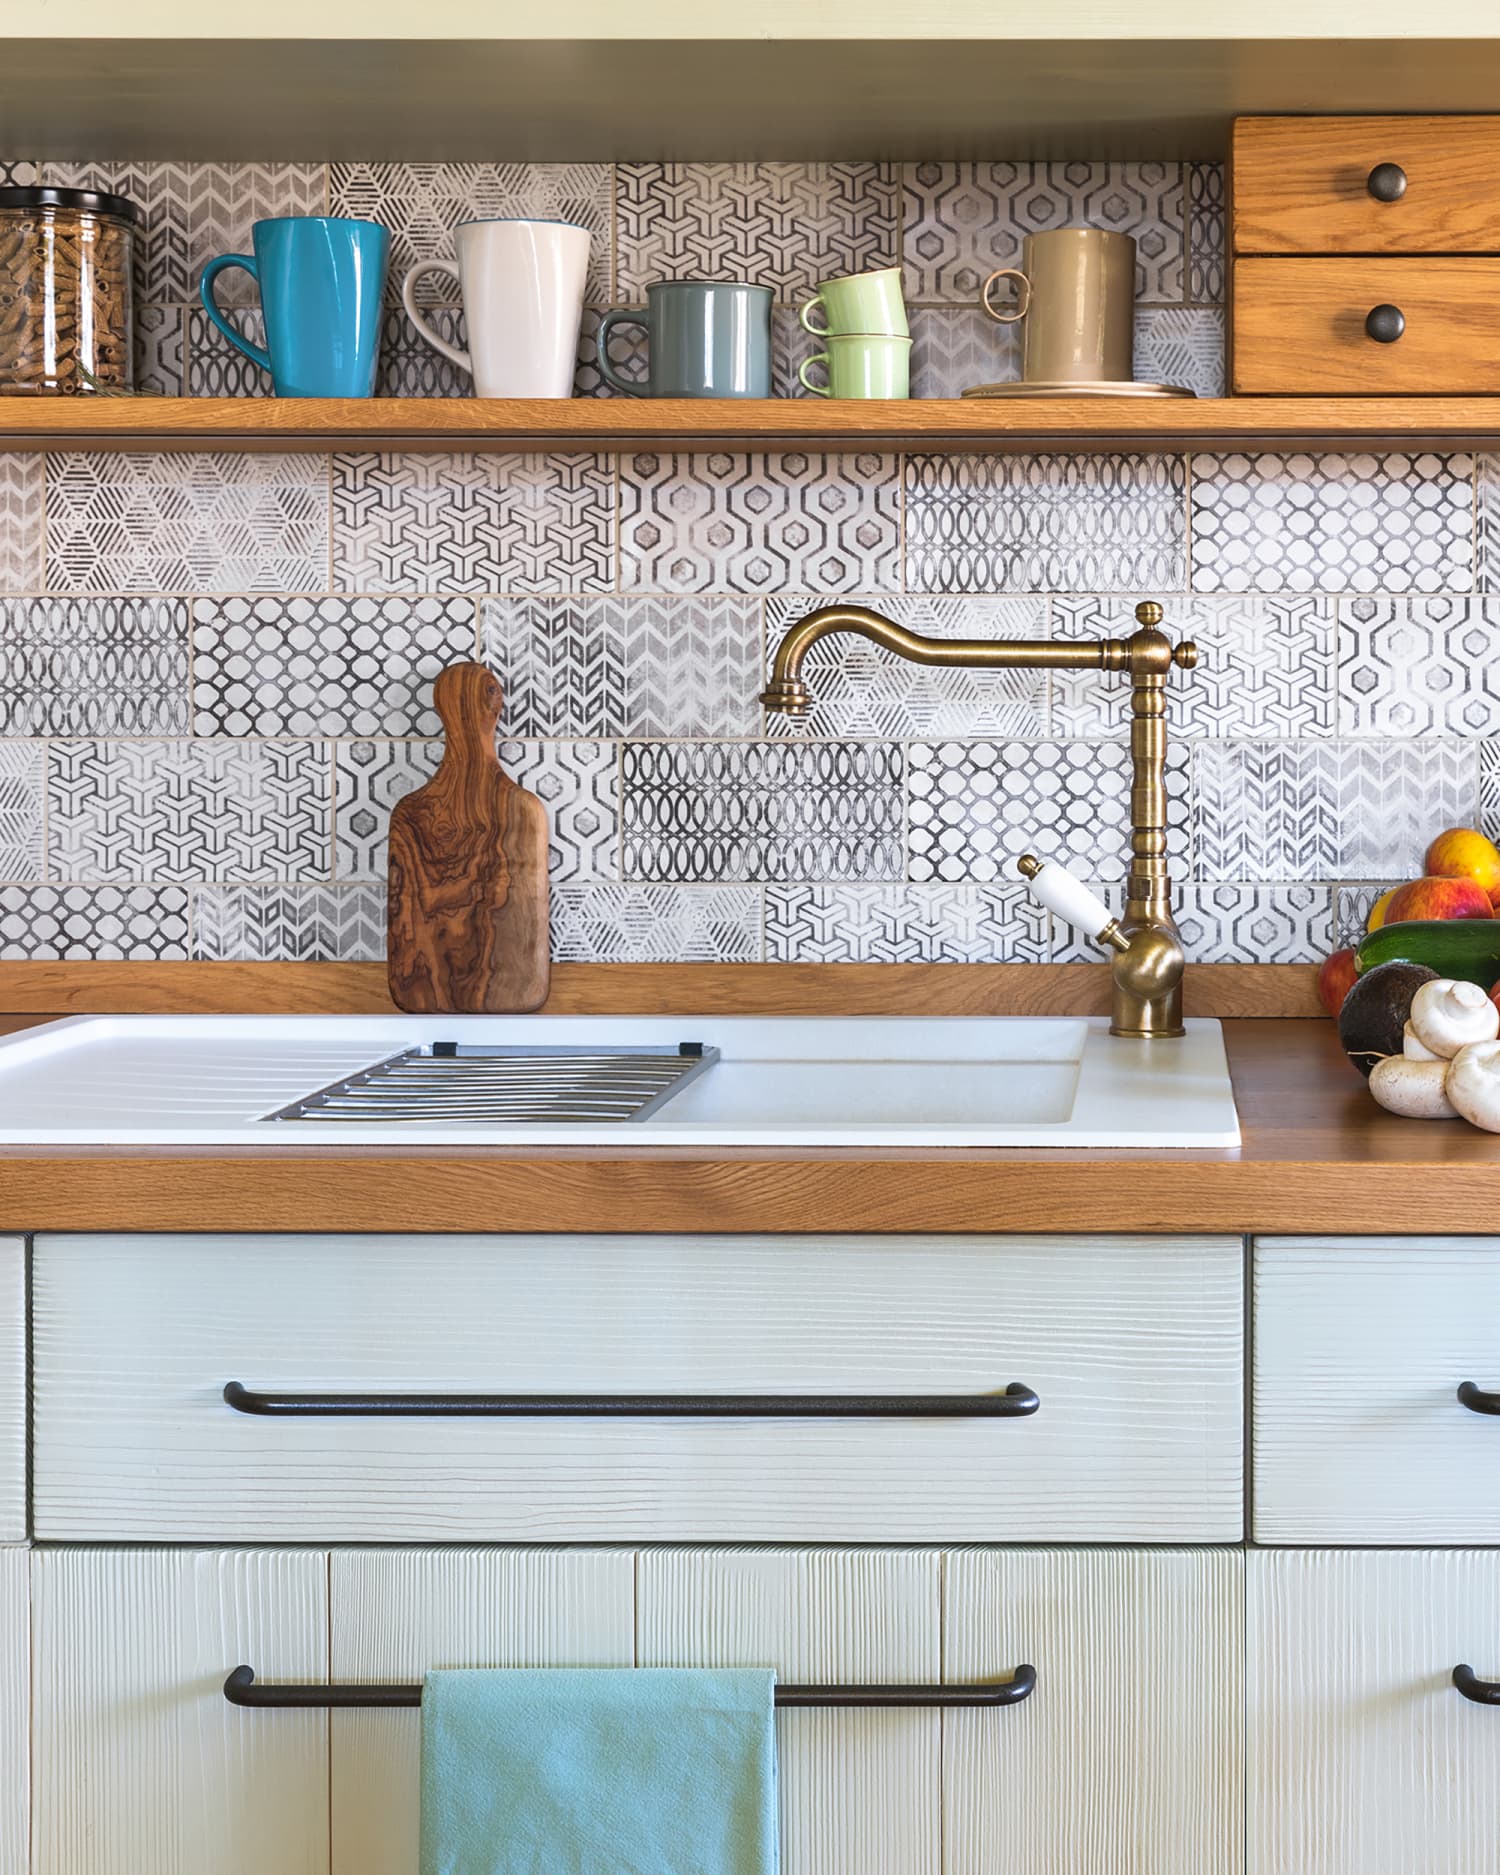 The Surprising Kitchen Upgrade I Would Splurge on Again and Again If I Could